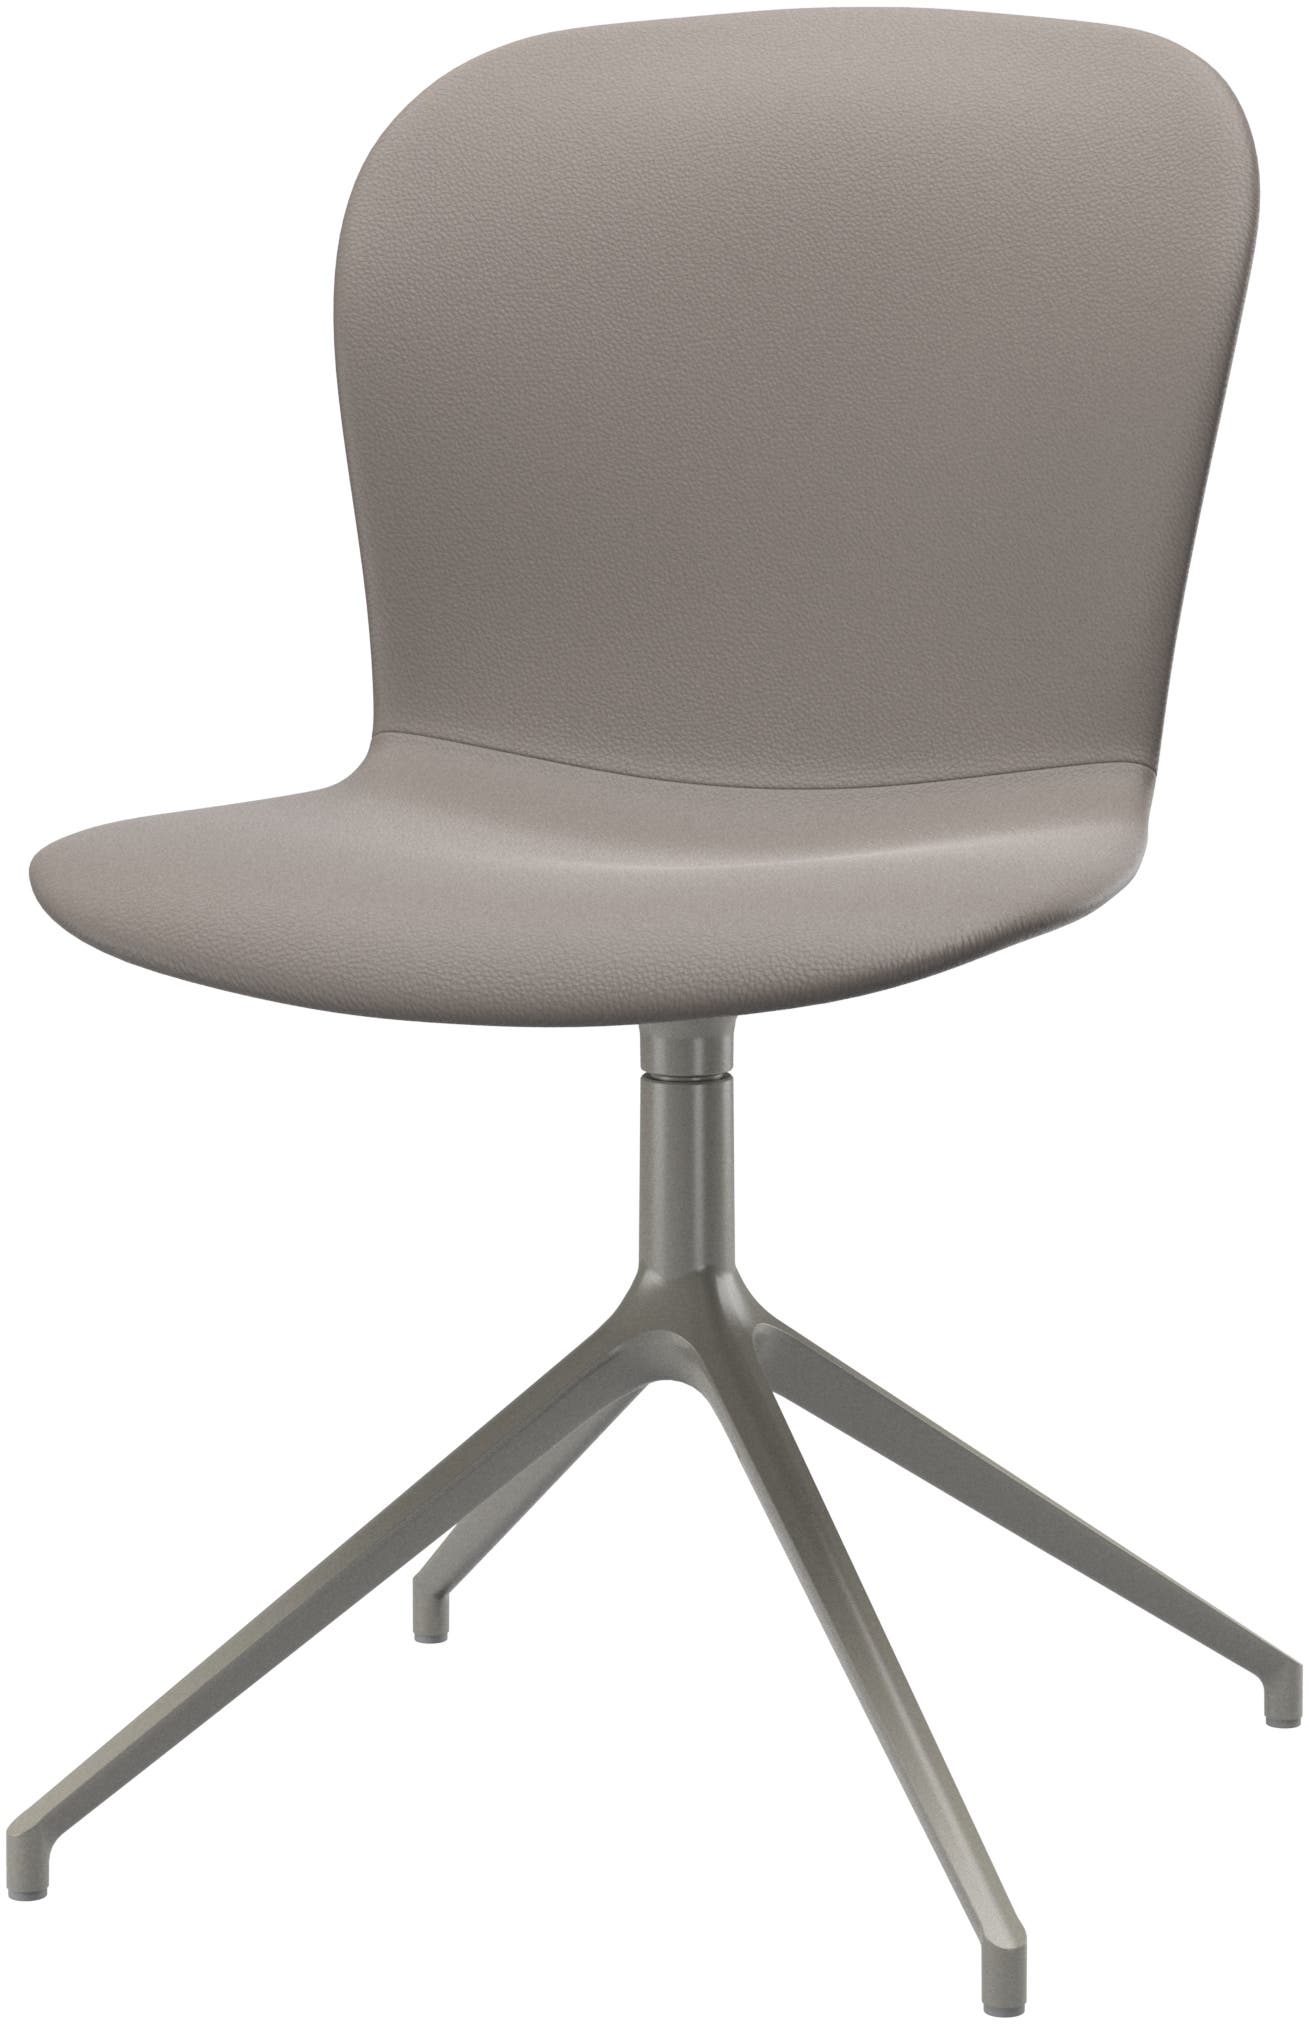 Adelaide dining chair (x5 available)